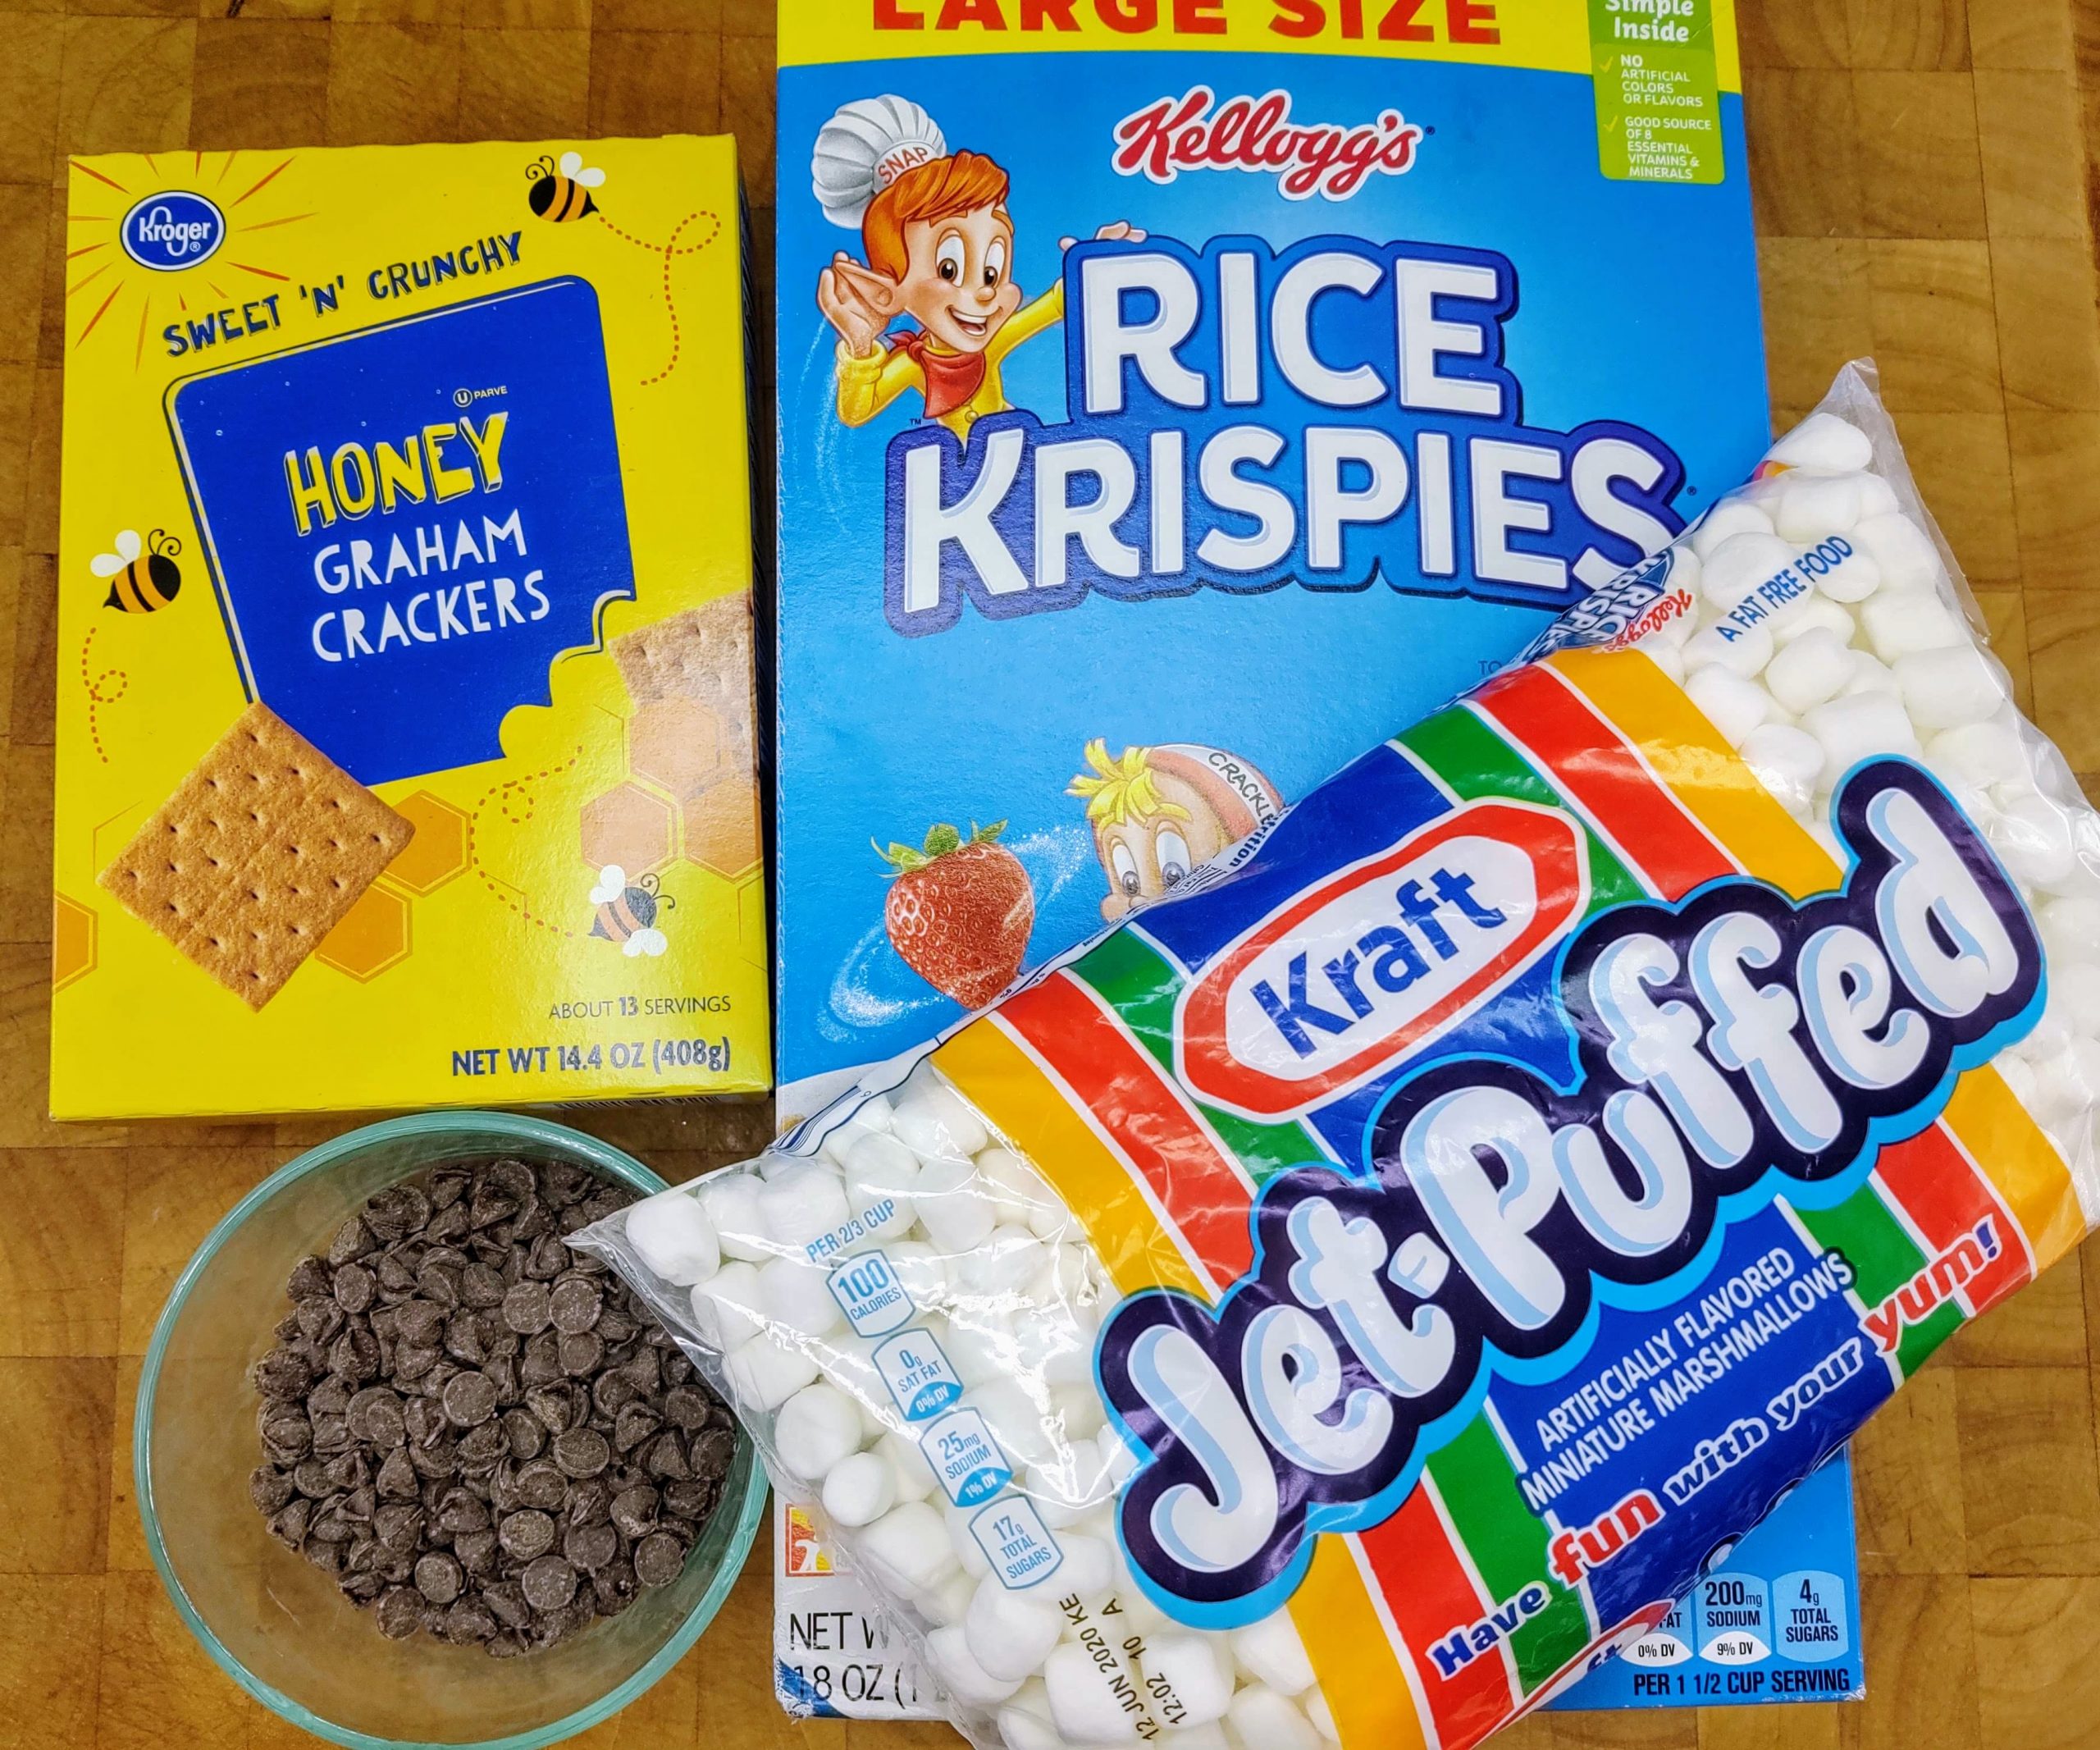 a box of rice krispie treats, a box of graham crackers, bag of jet puffed marshmallows, bowl of chocolate chips